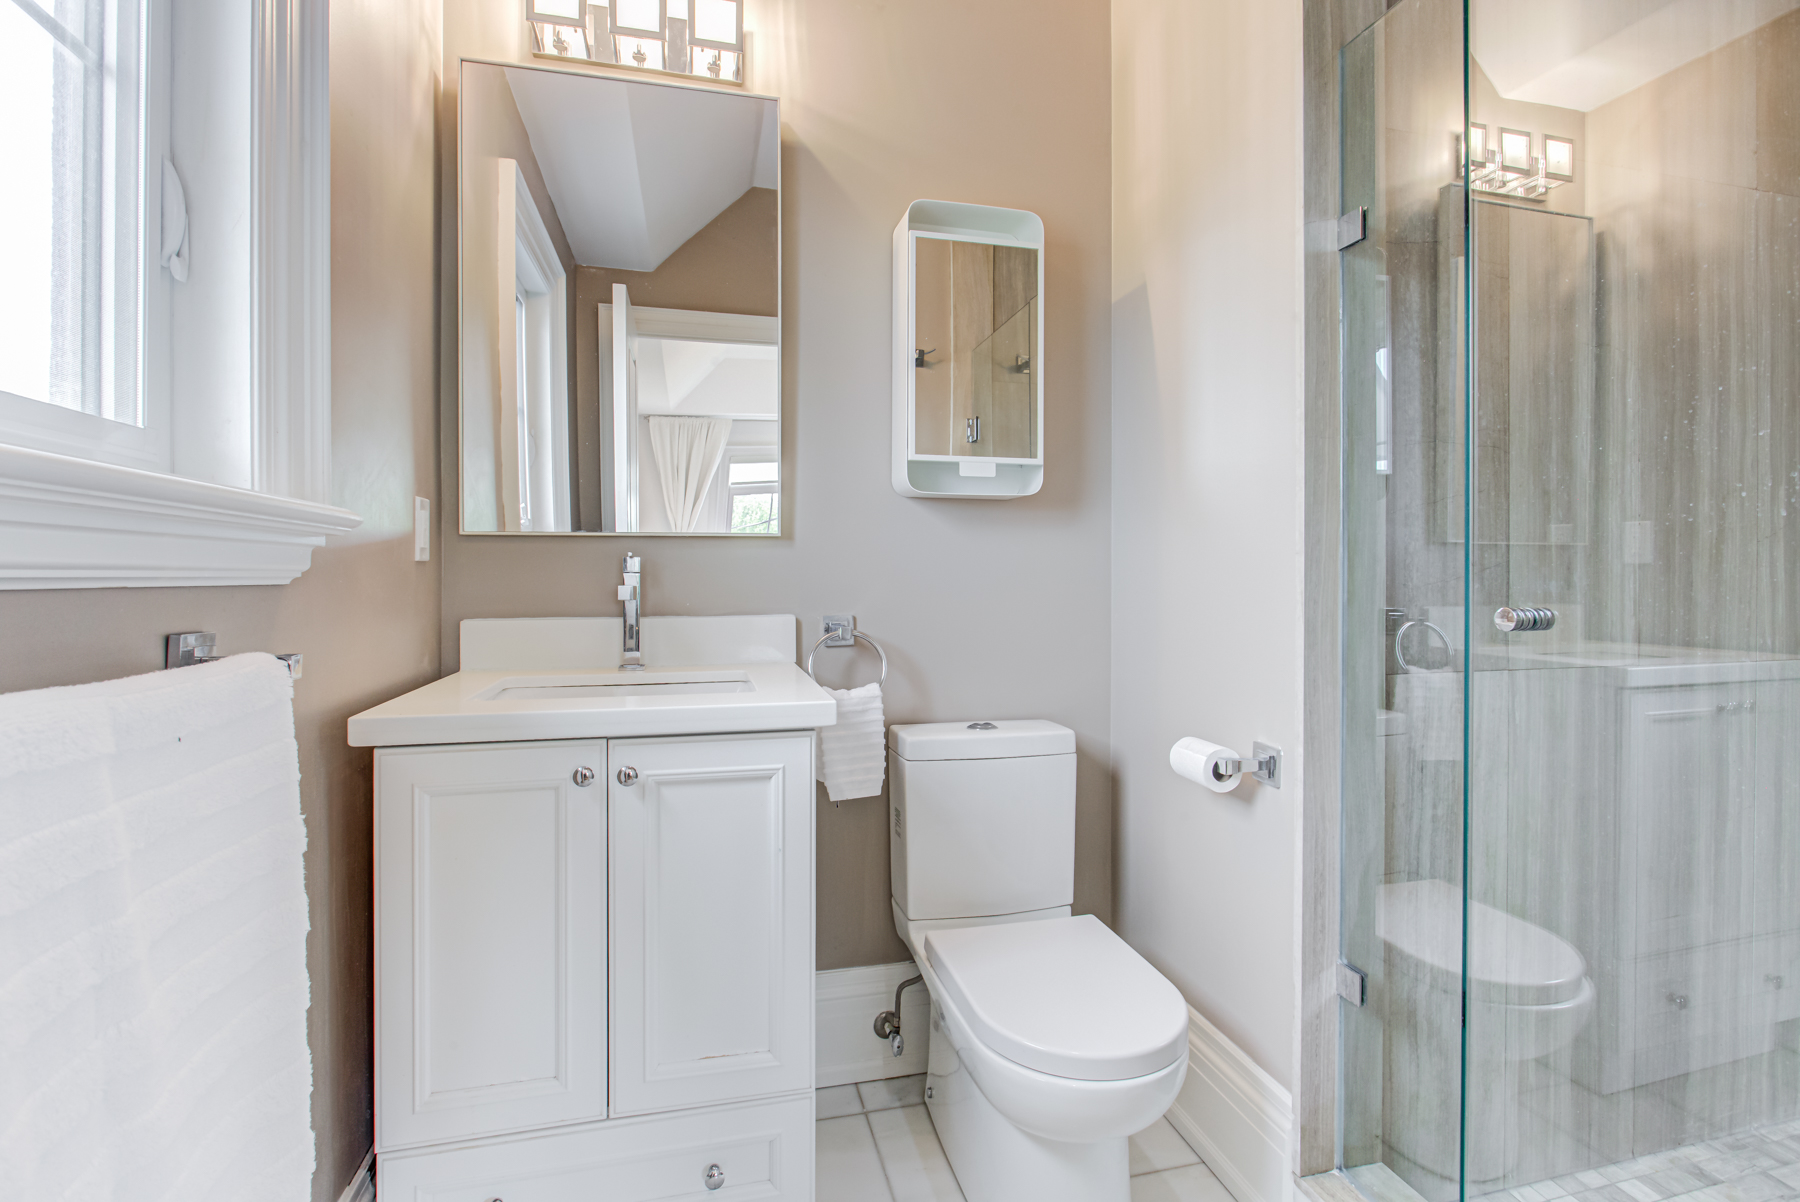 Ensuite bath with white vanity, medicine cabinet and frame-less glass shower.